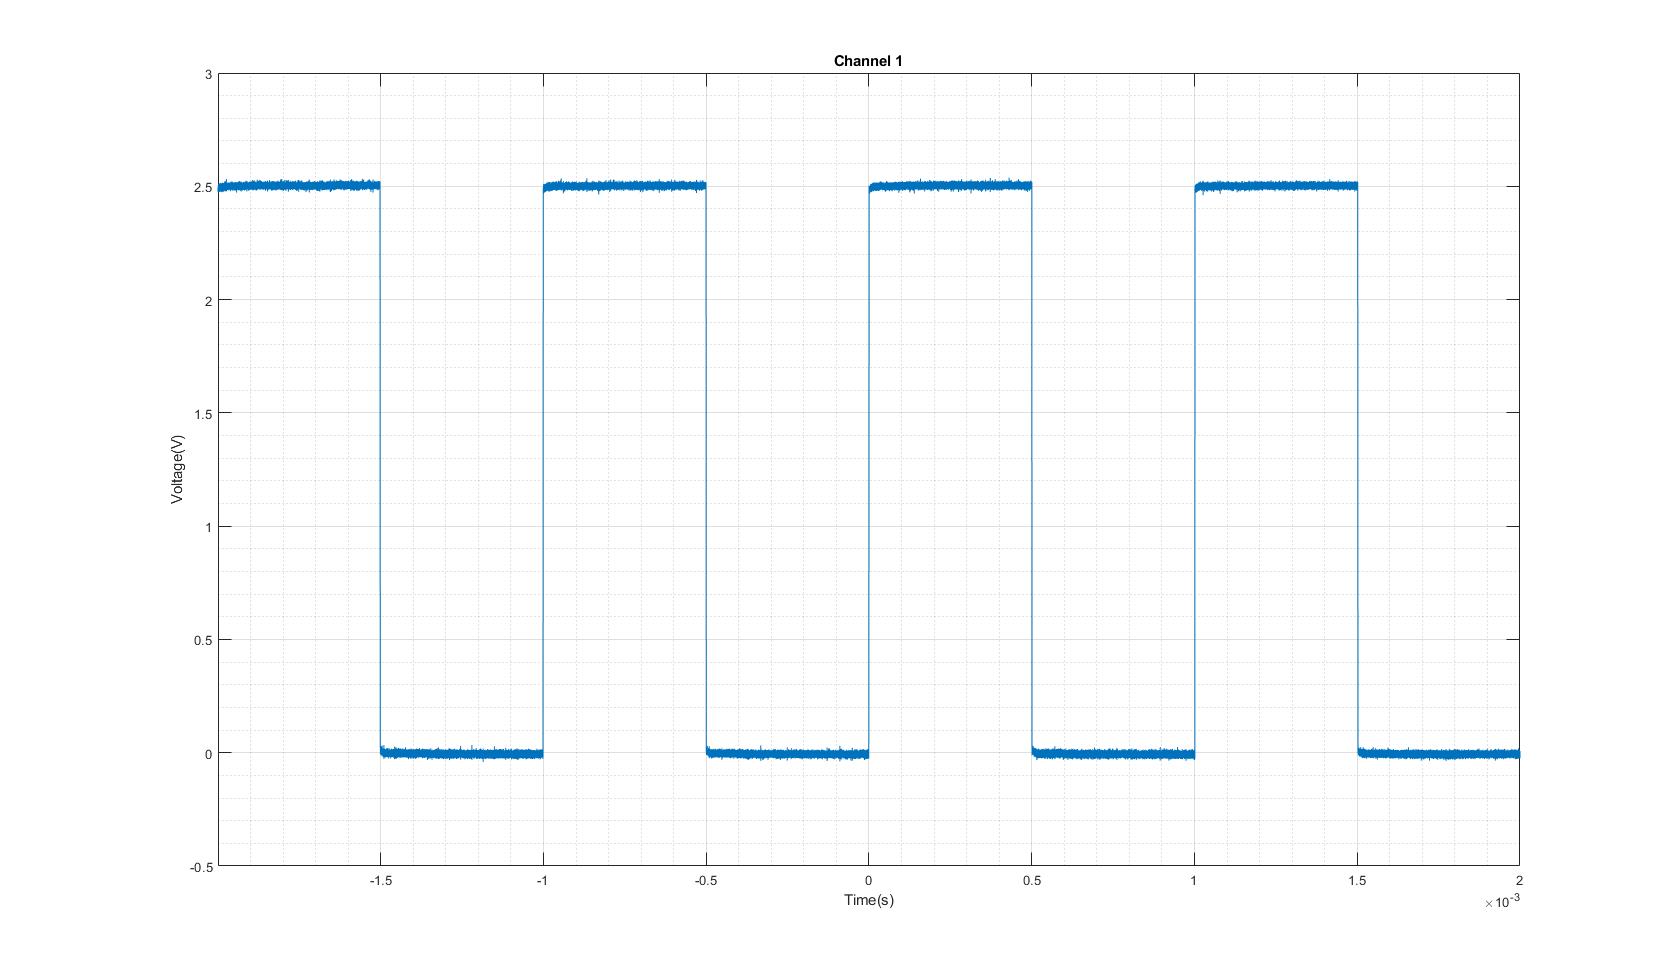 Result of using my 2-byte code to capture the same 1kHz calibration square wave.